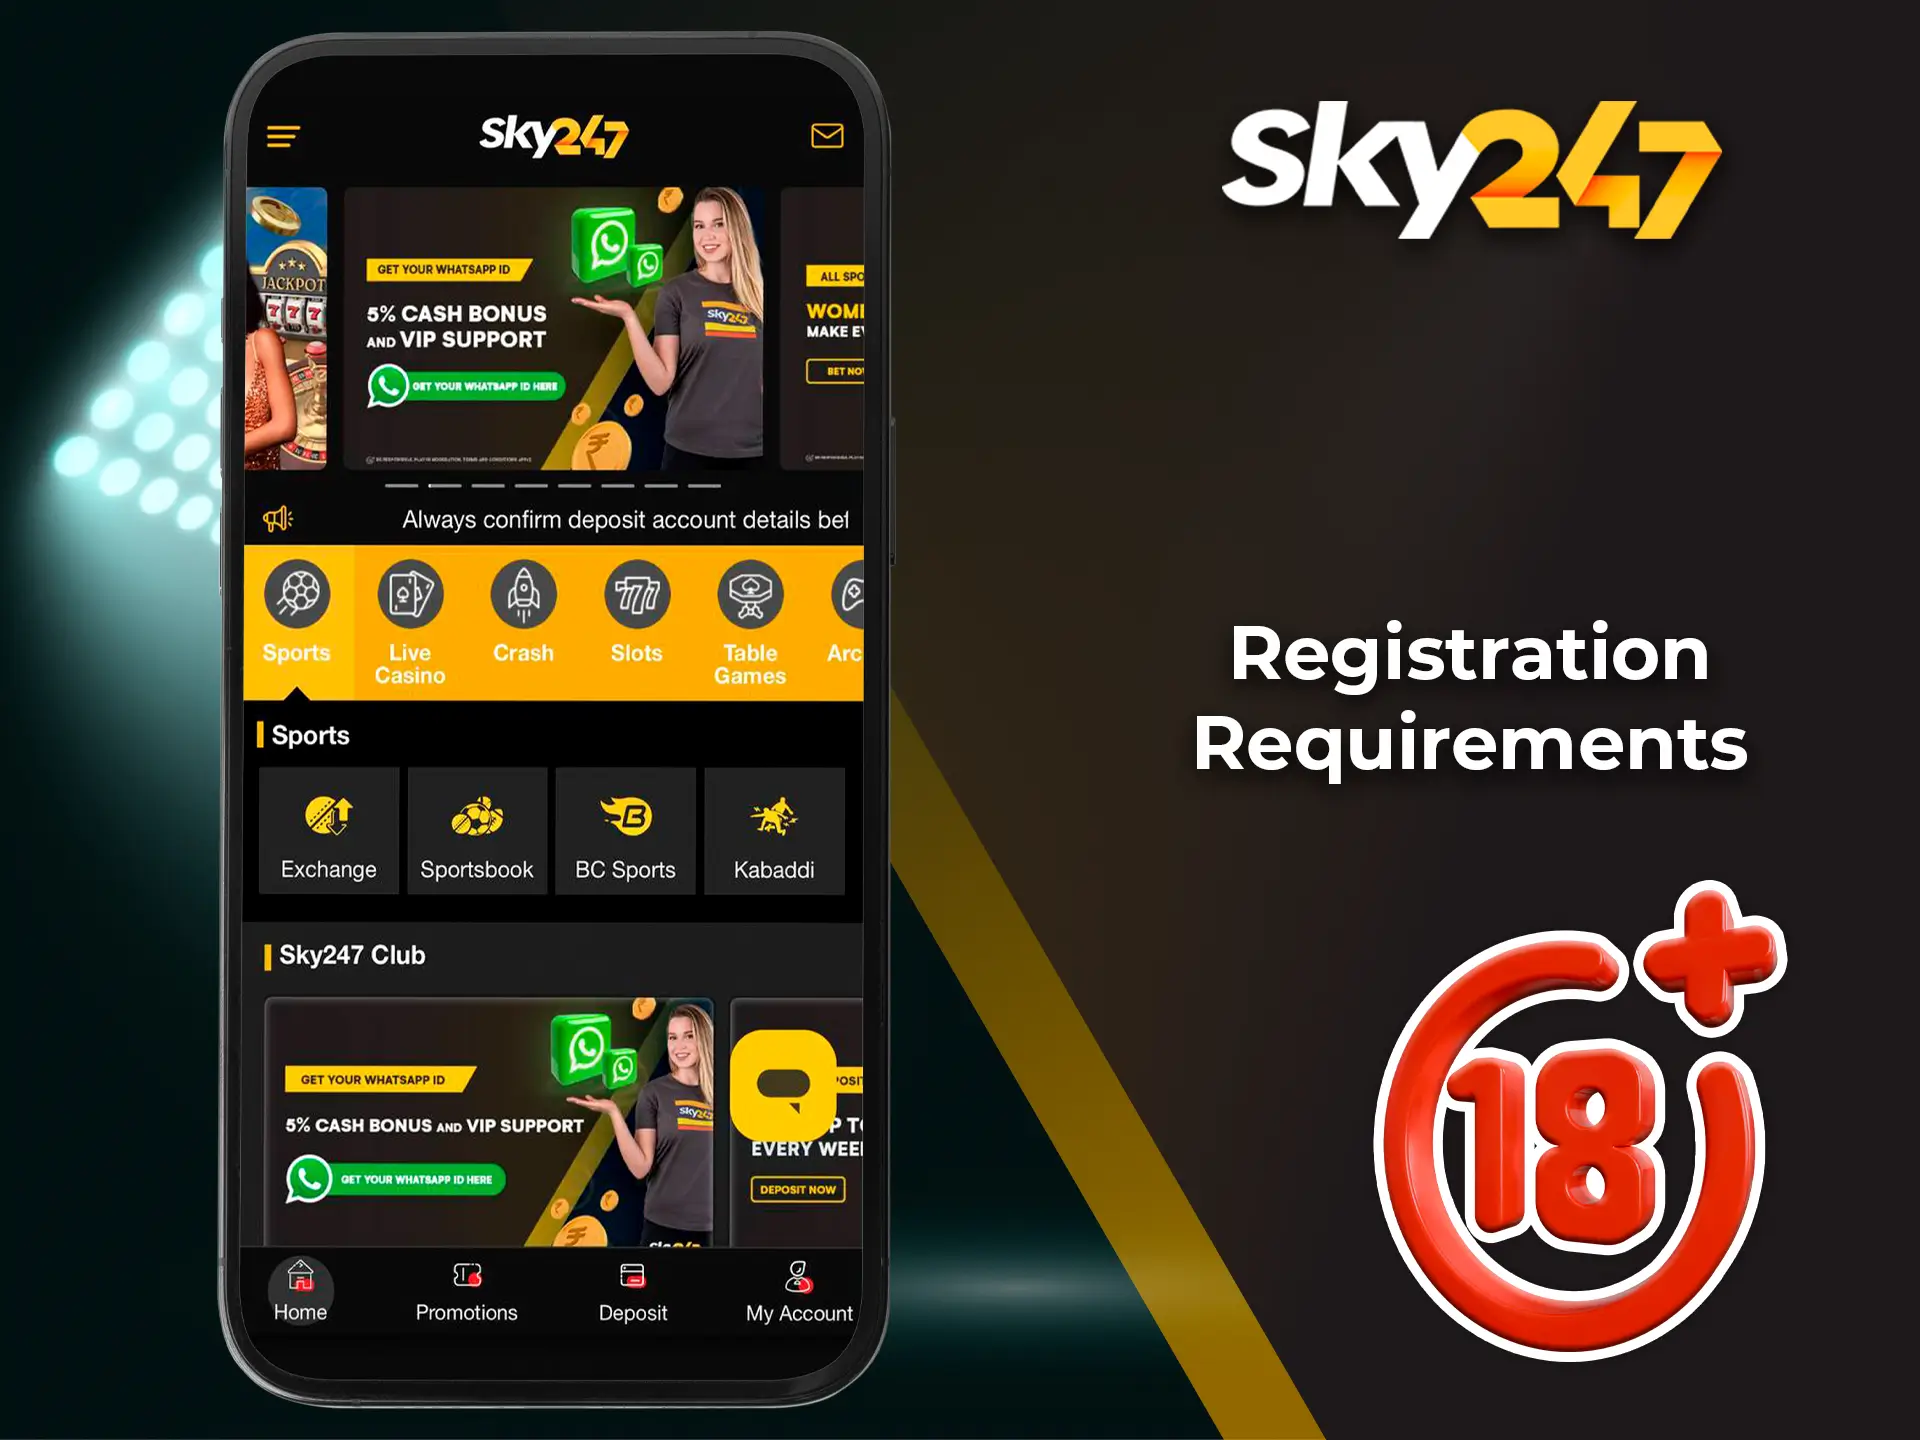 Only users of legal age can bet and play at Sky247 Casino.